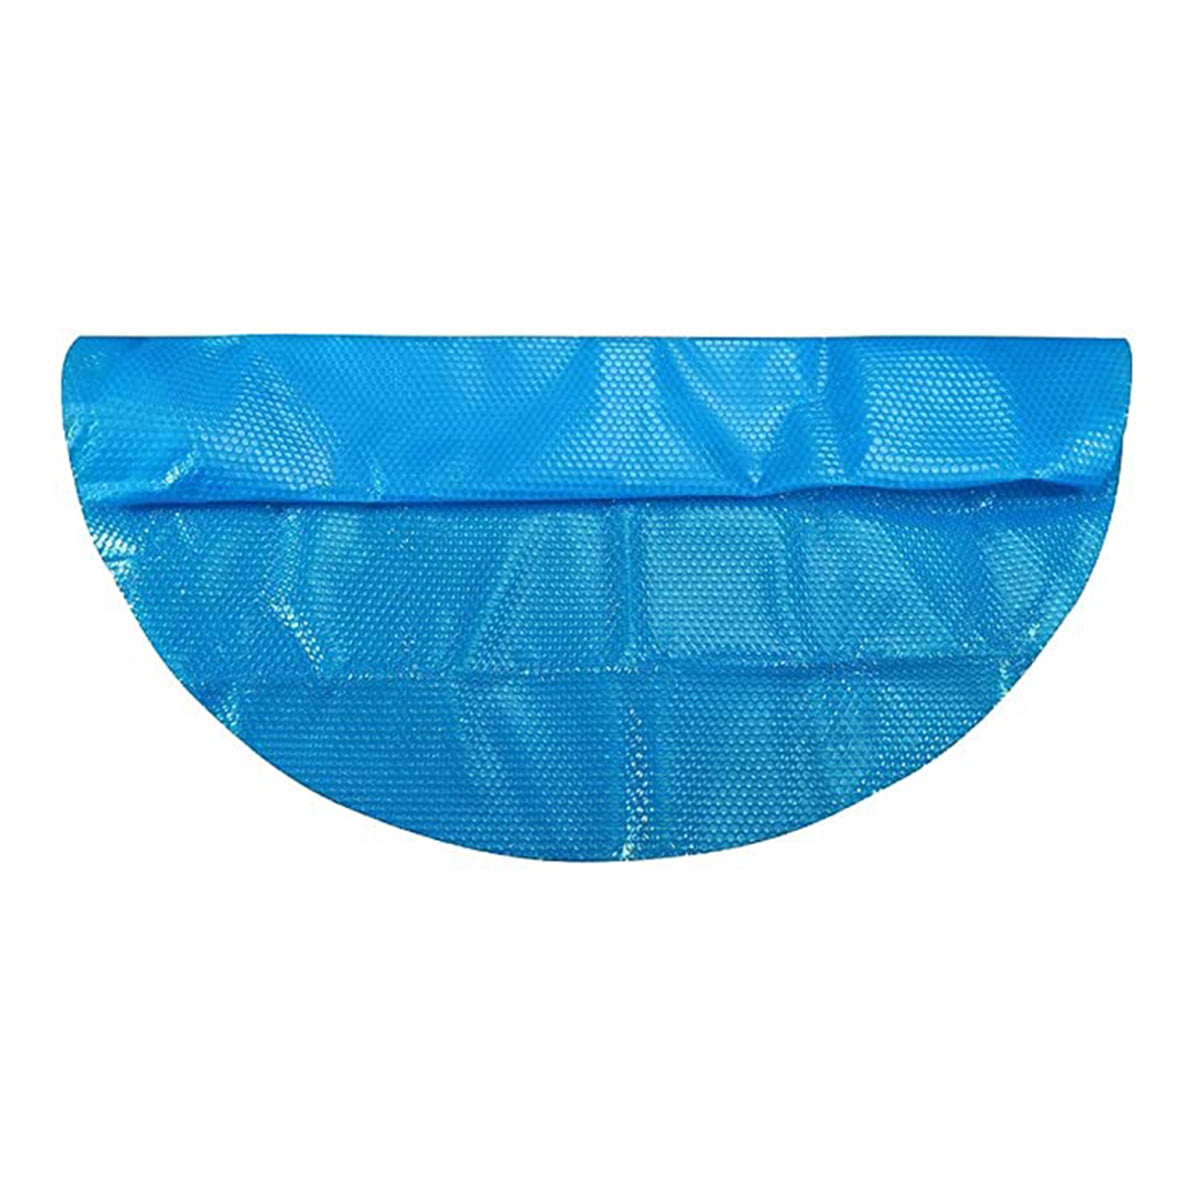 Details about   15 Ft Pool Covers Solar Protector for Home Above Ground Protection Swimming Pool 